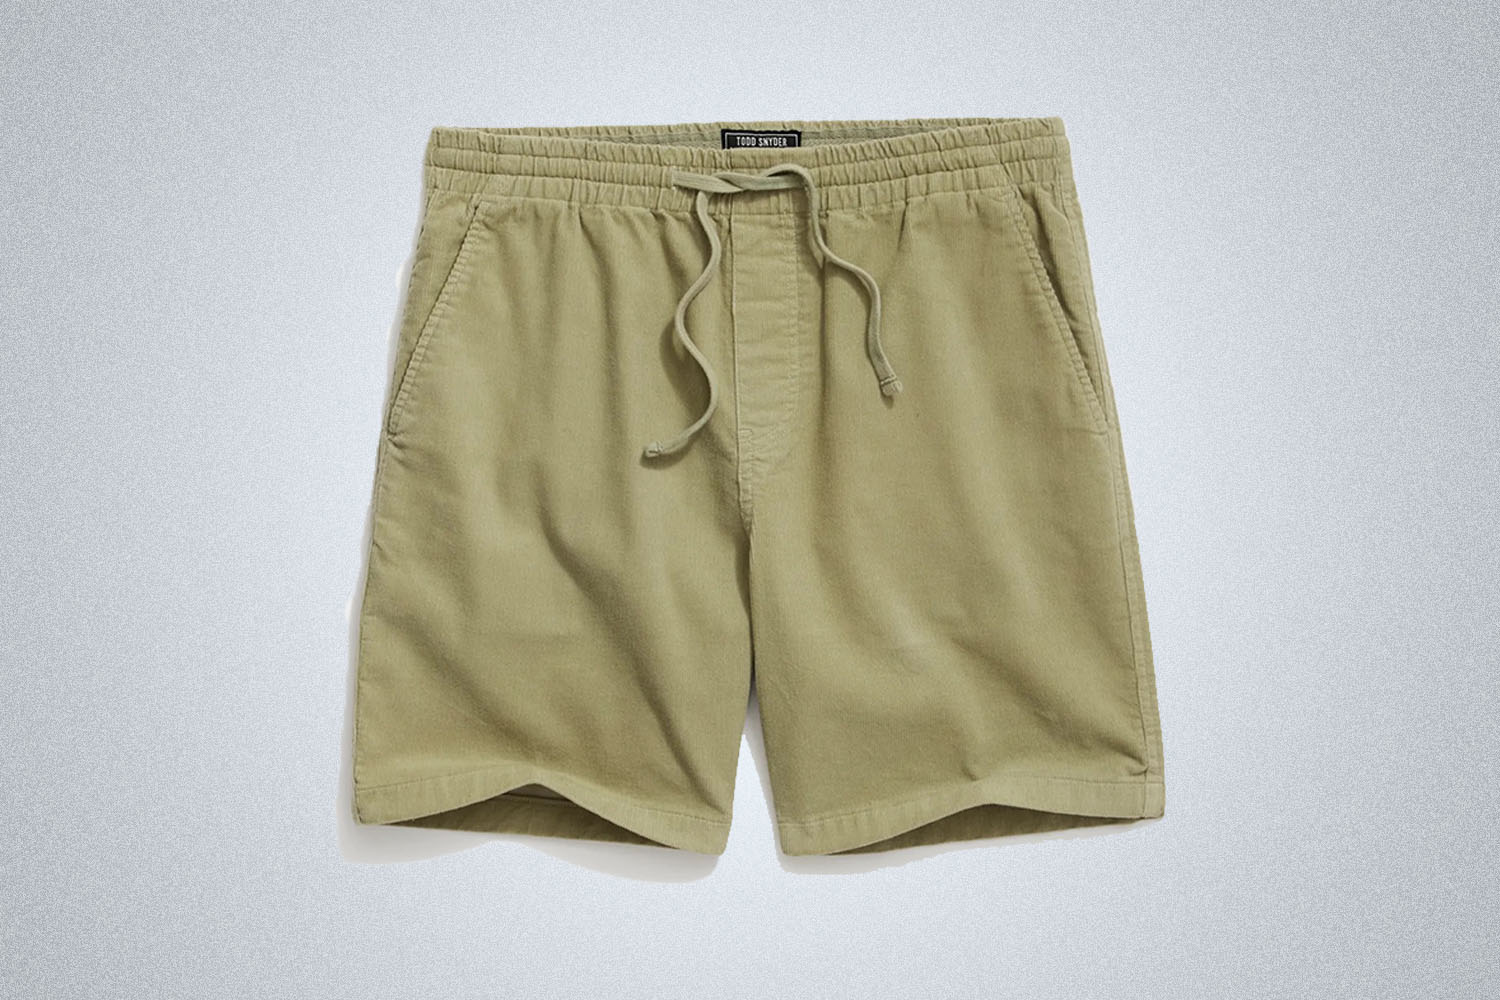 A pair of green corduroy shorts from Todd Snyder on a grey background